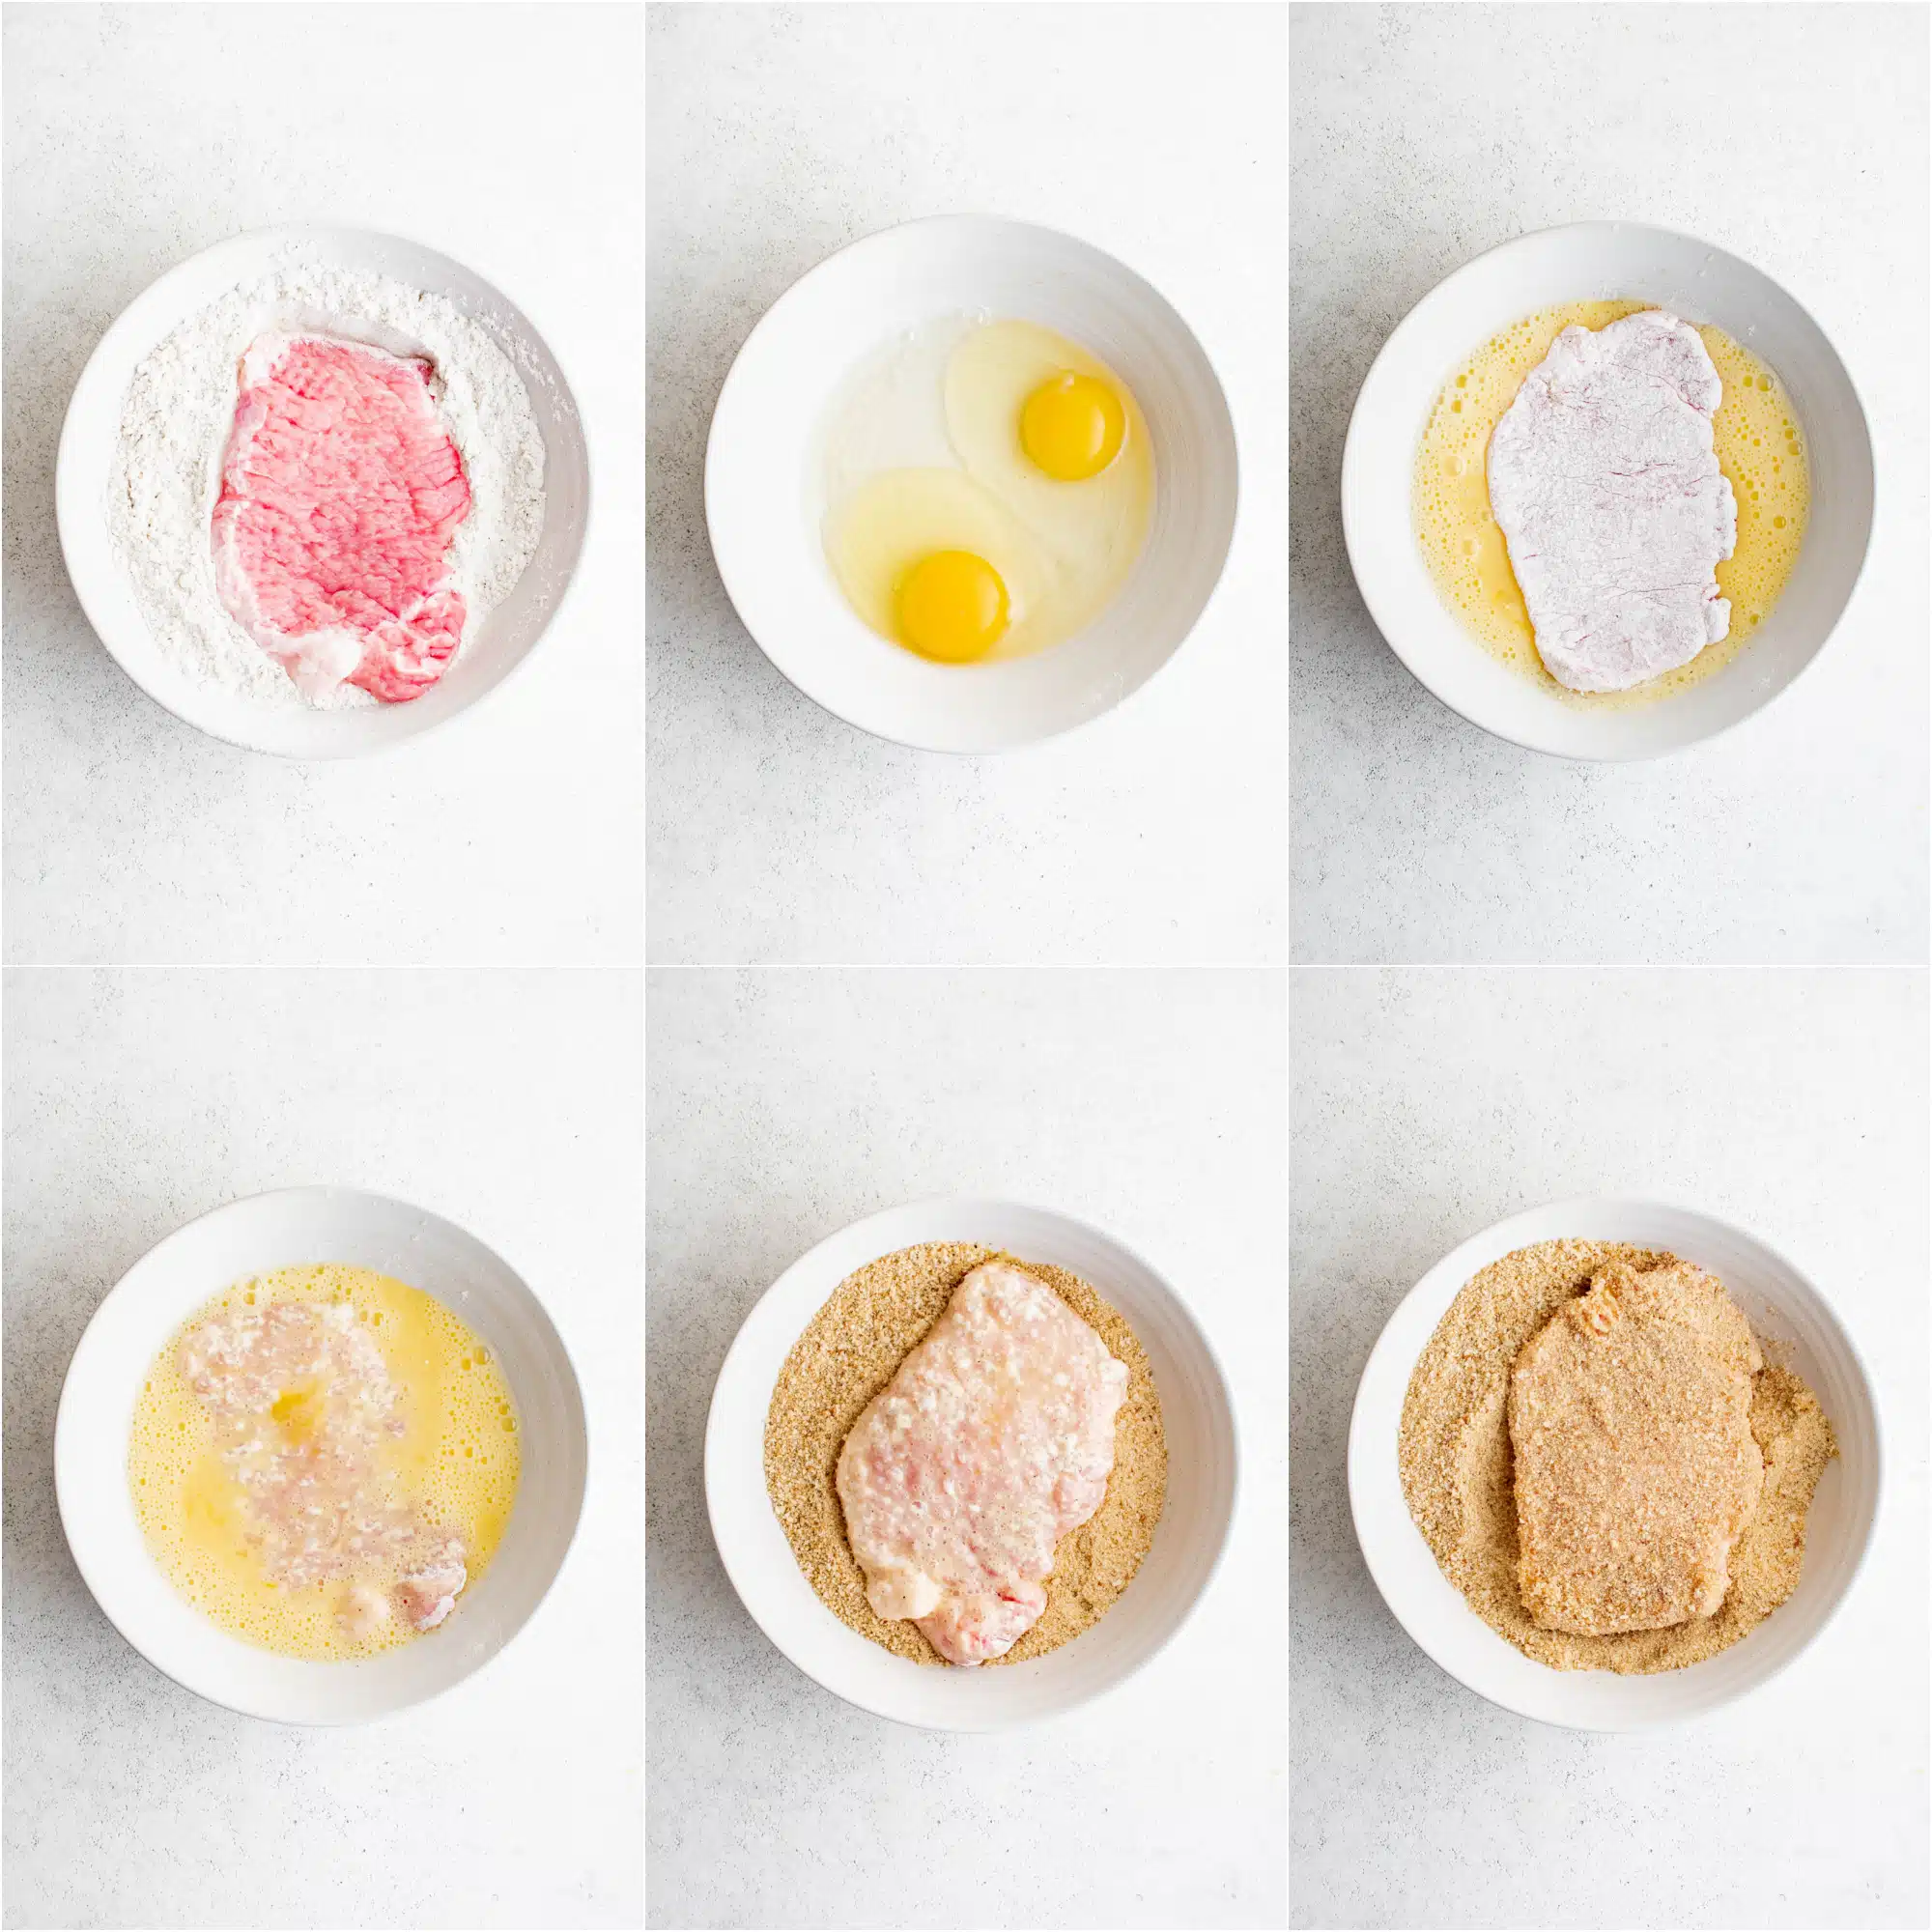 Six images in a collage showing the steps needed to bread pork cutlets in flour first, then egg, and then breadcrumbs.